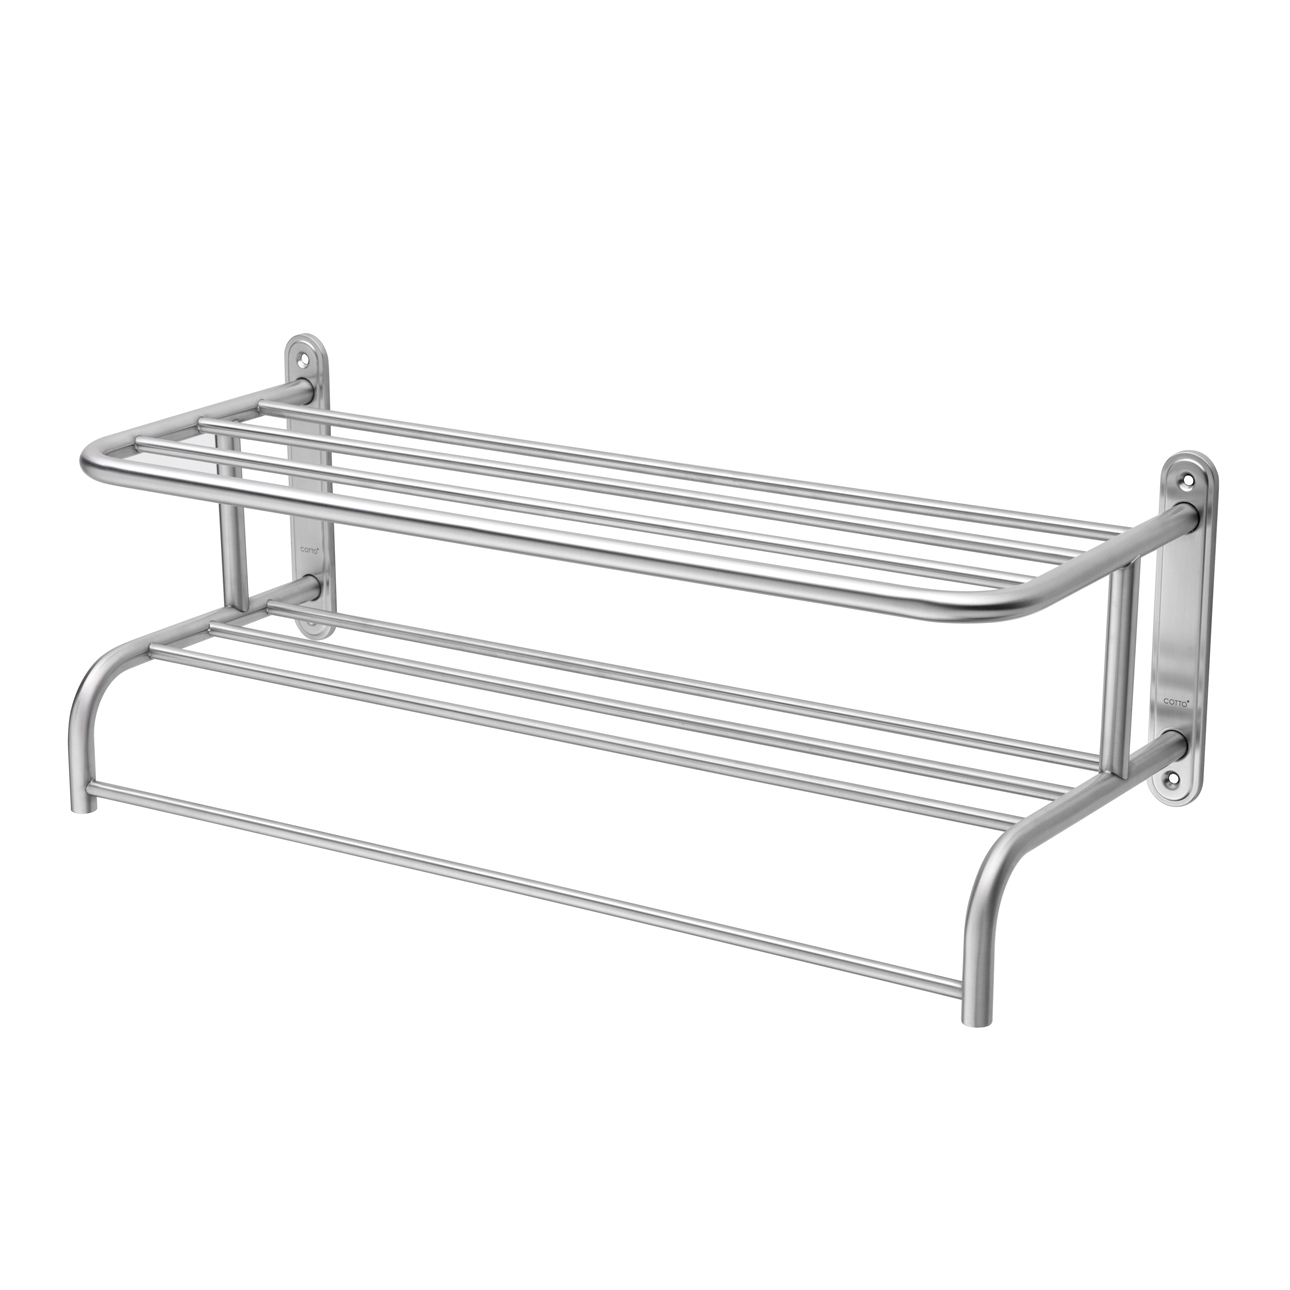 CT0155(HM) 60 Cm. Stainless Multishelf, New Hotel Series - COTTO